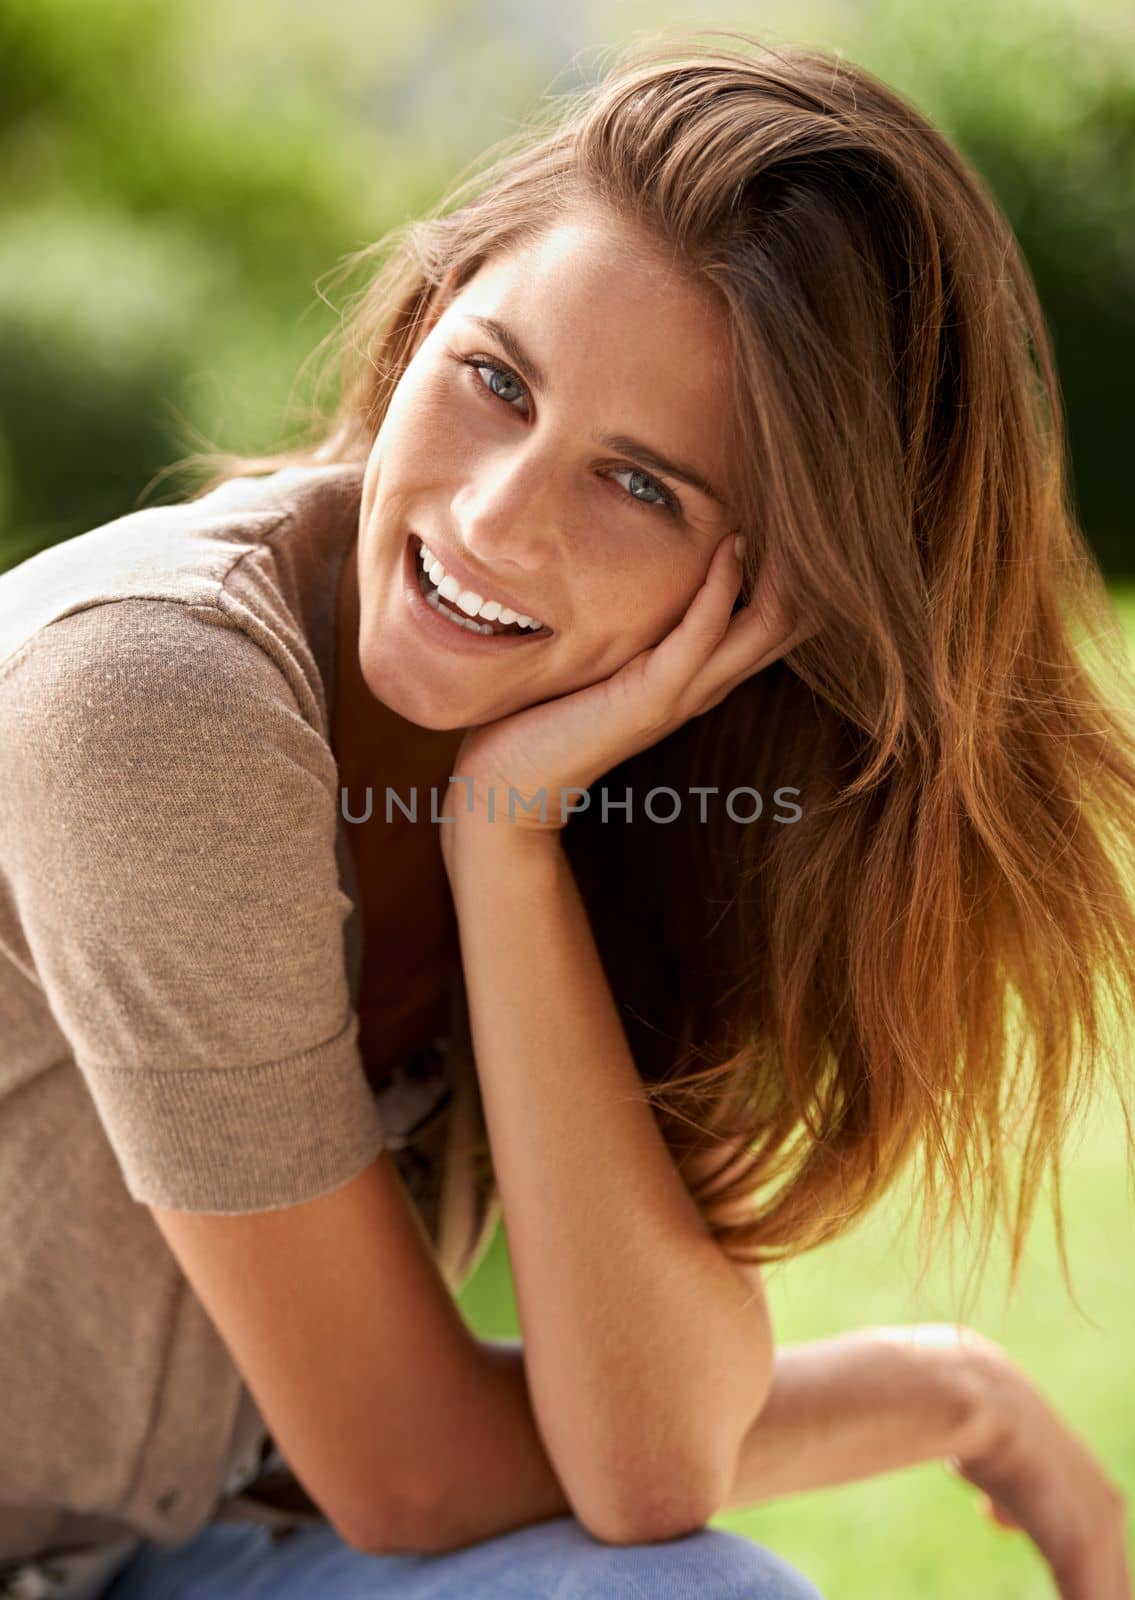 Smelling the sunshine and outdoors. a beautiful young woman relaxing in the outdoors